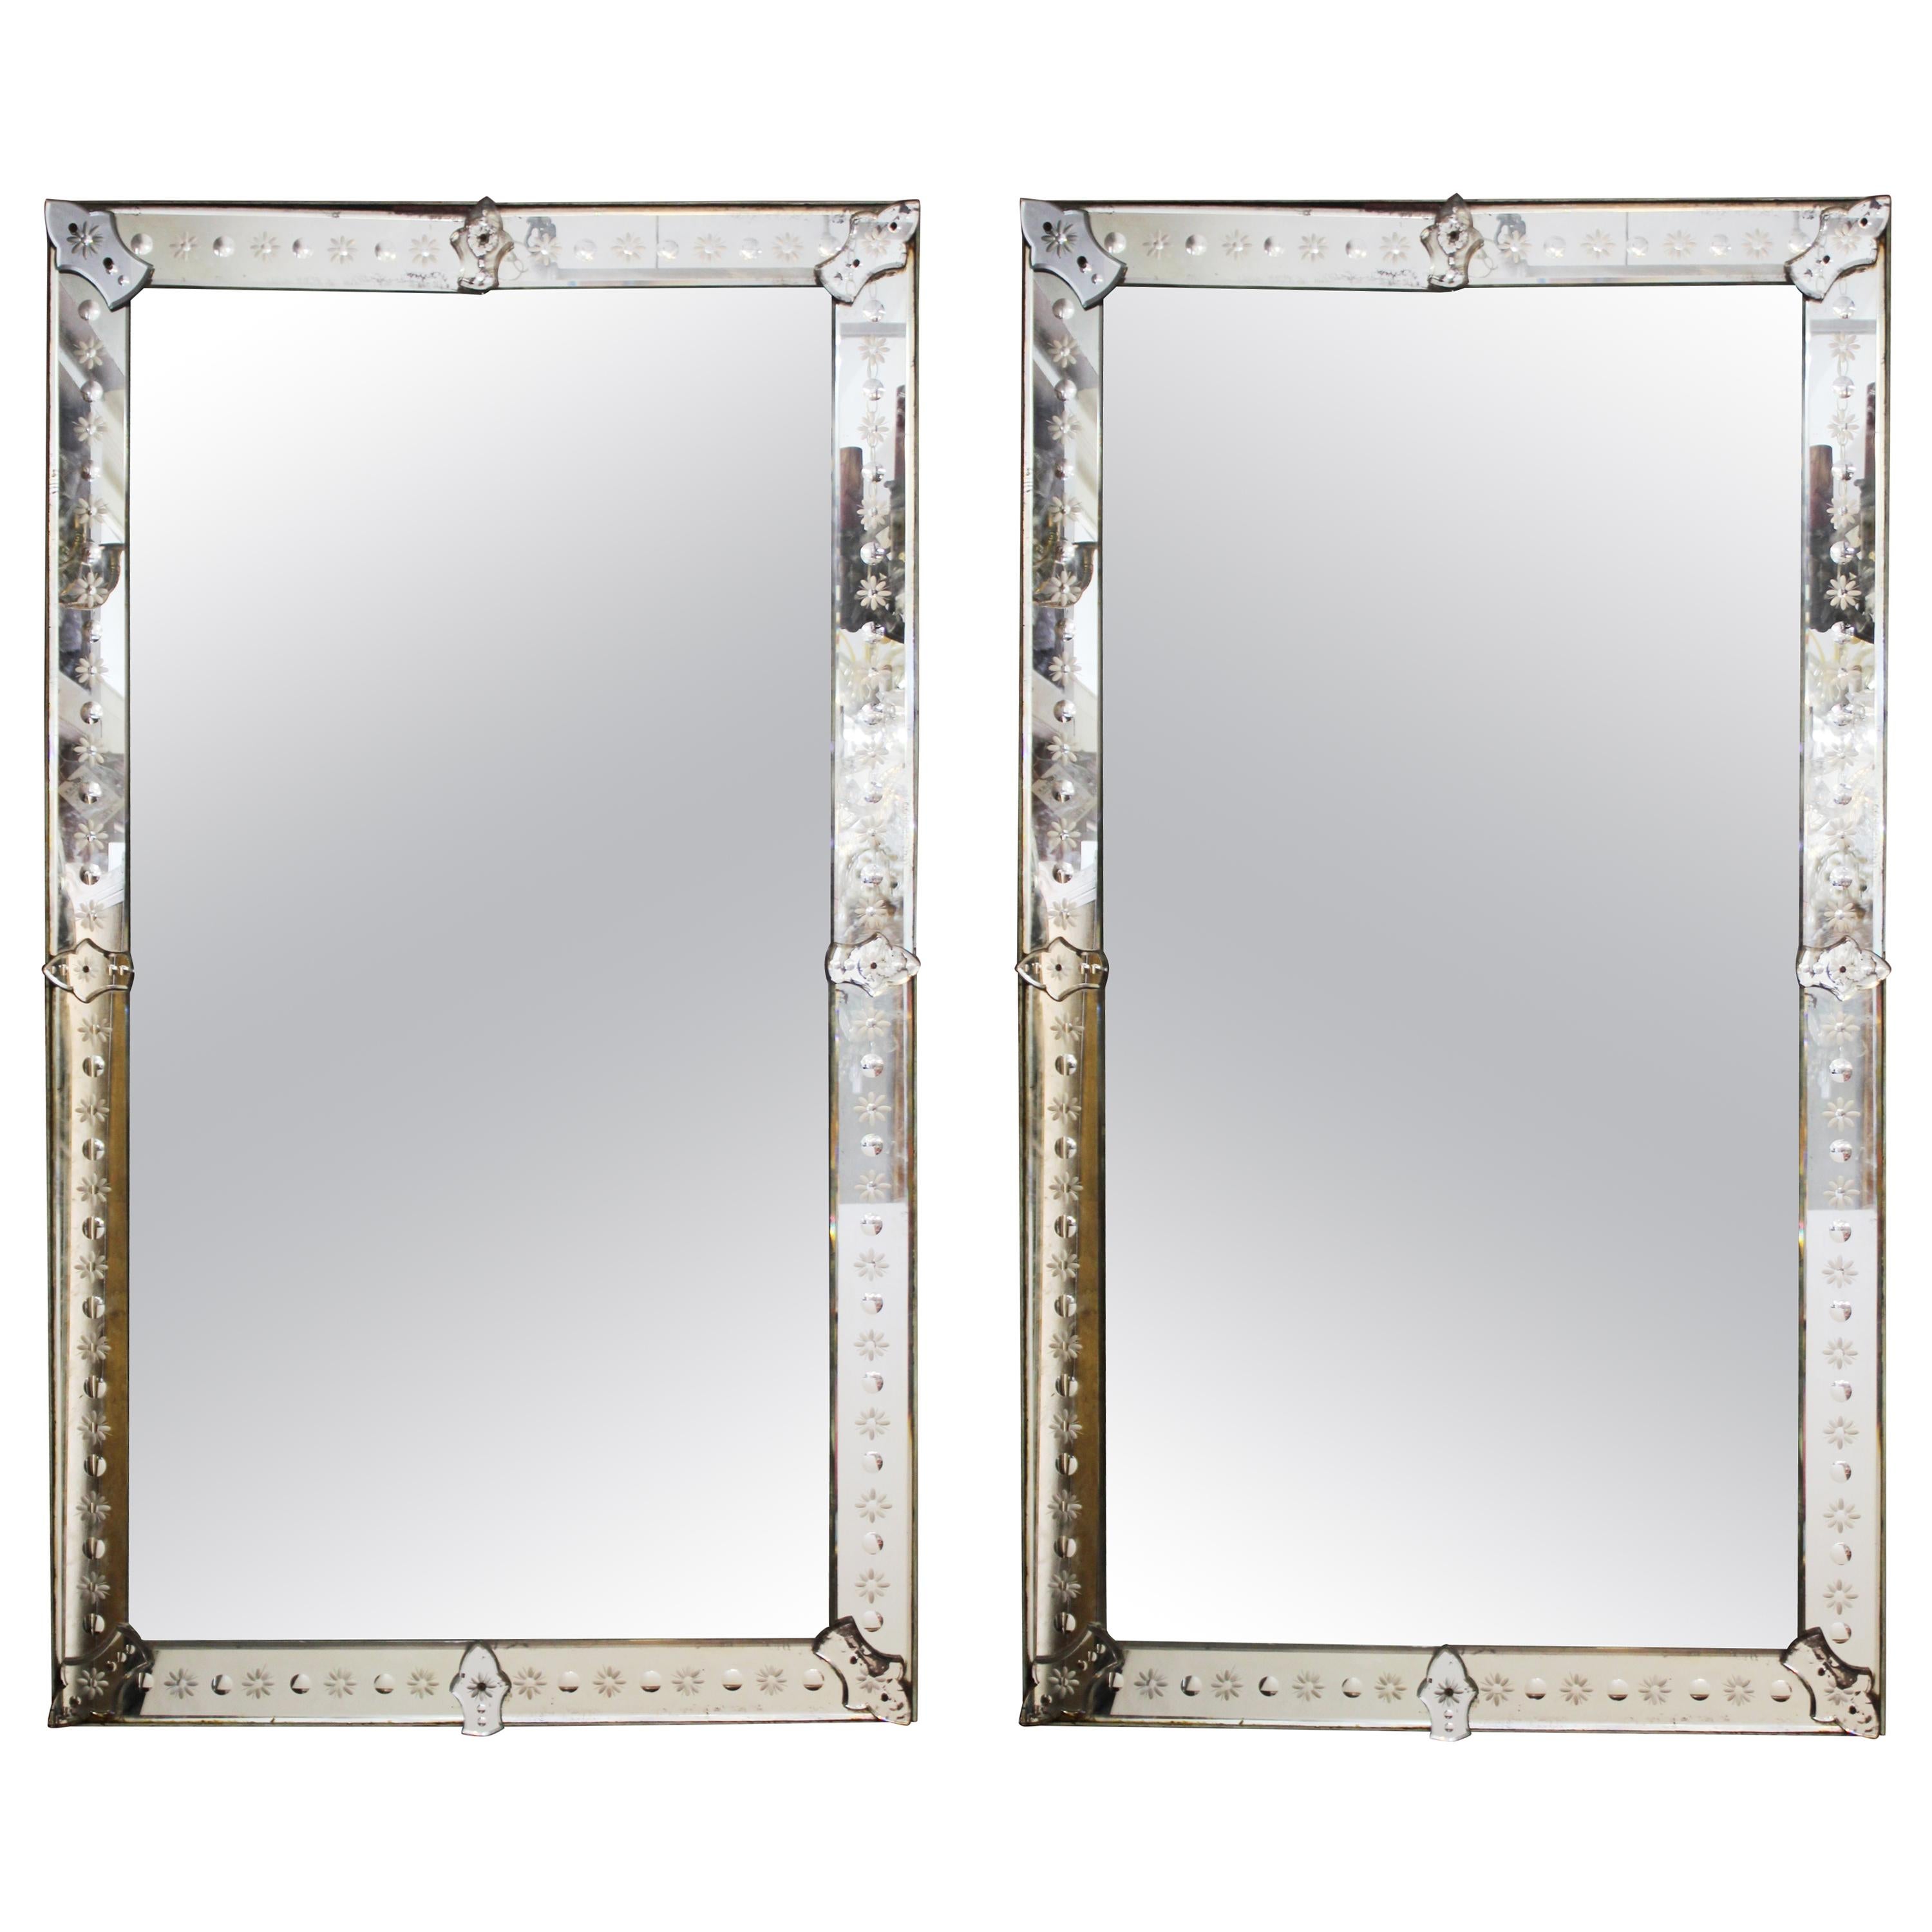 Hollywood Regency Venetian Mirrors with Etched Borders